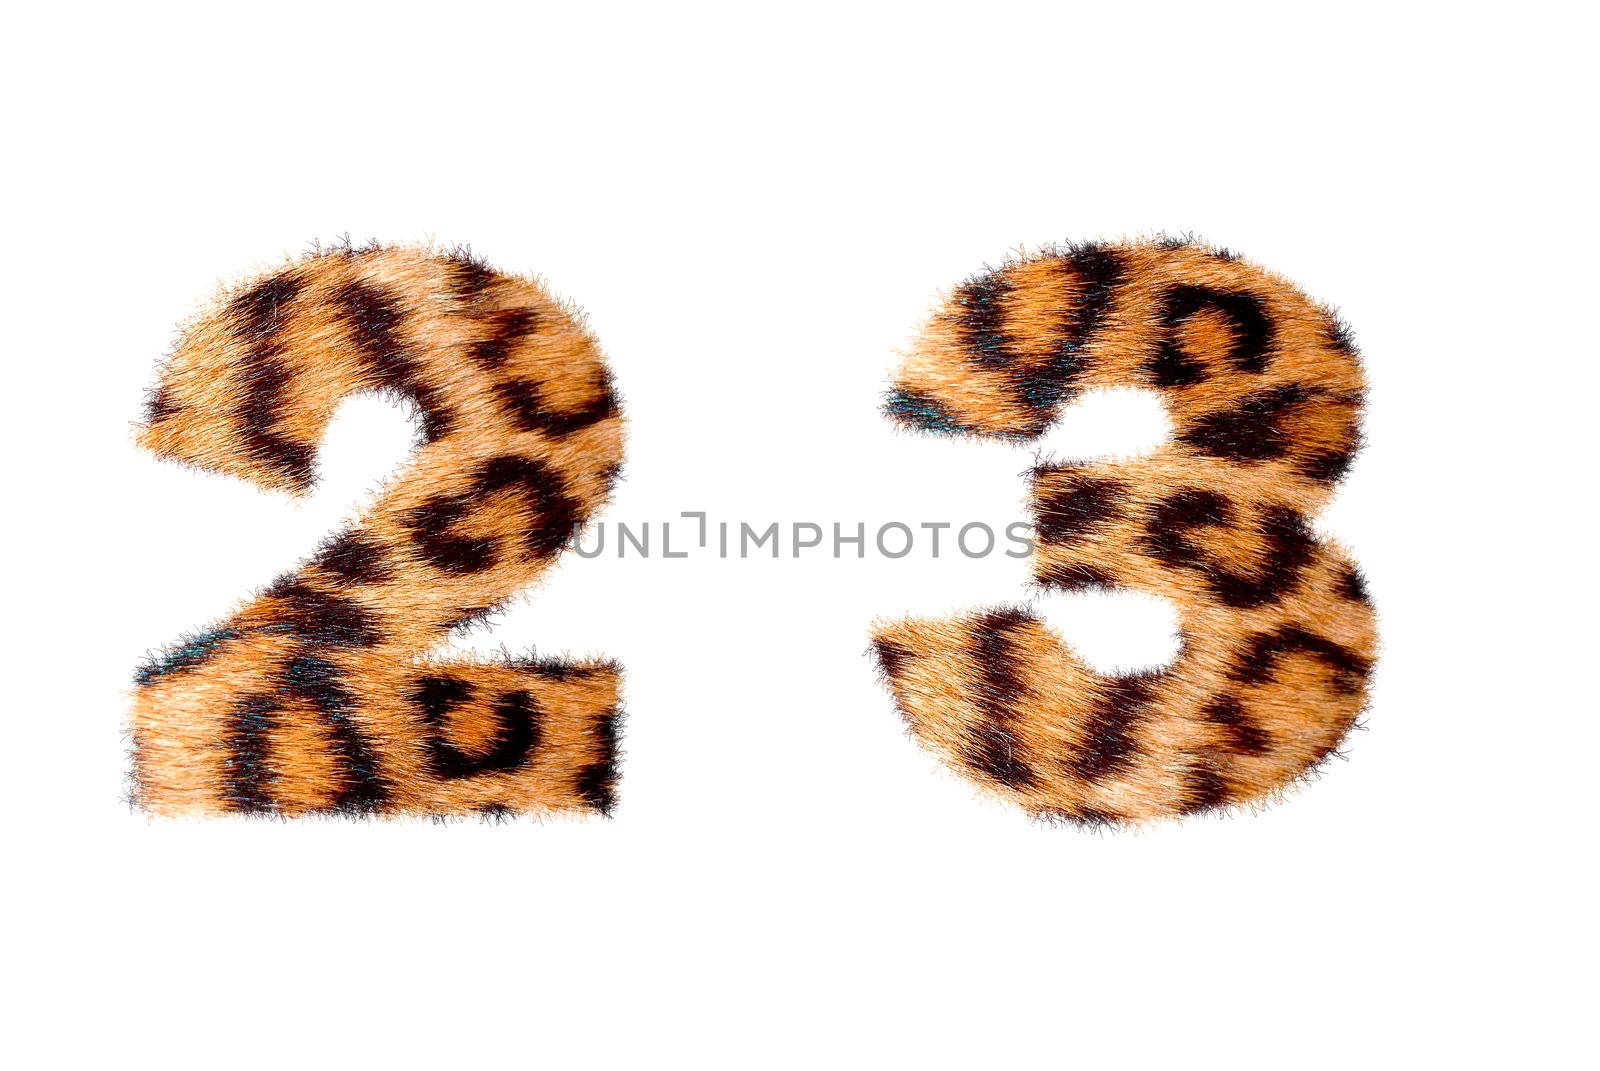 Custom number symbol base on leopard skin, isolated in white